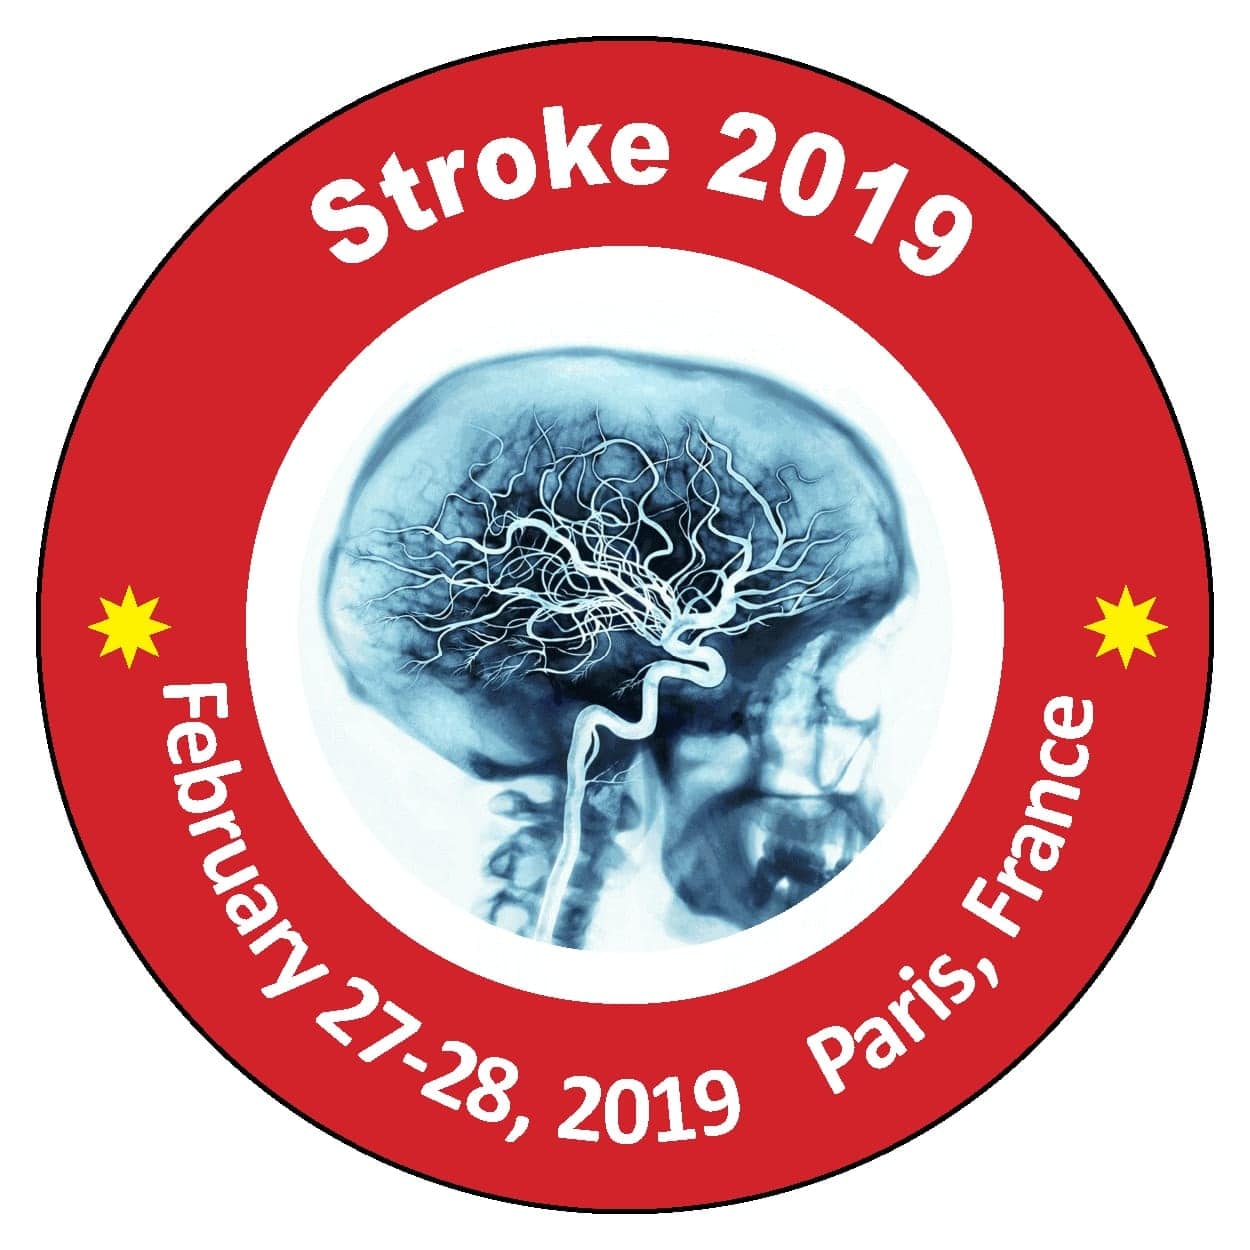 Photos of 7th International Conference on Neurodegenerative Disorders and Stroke